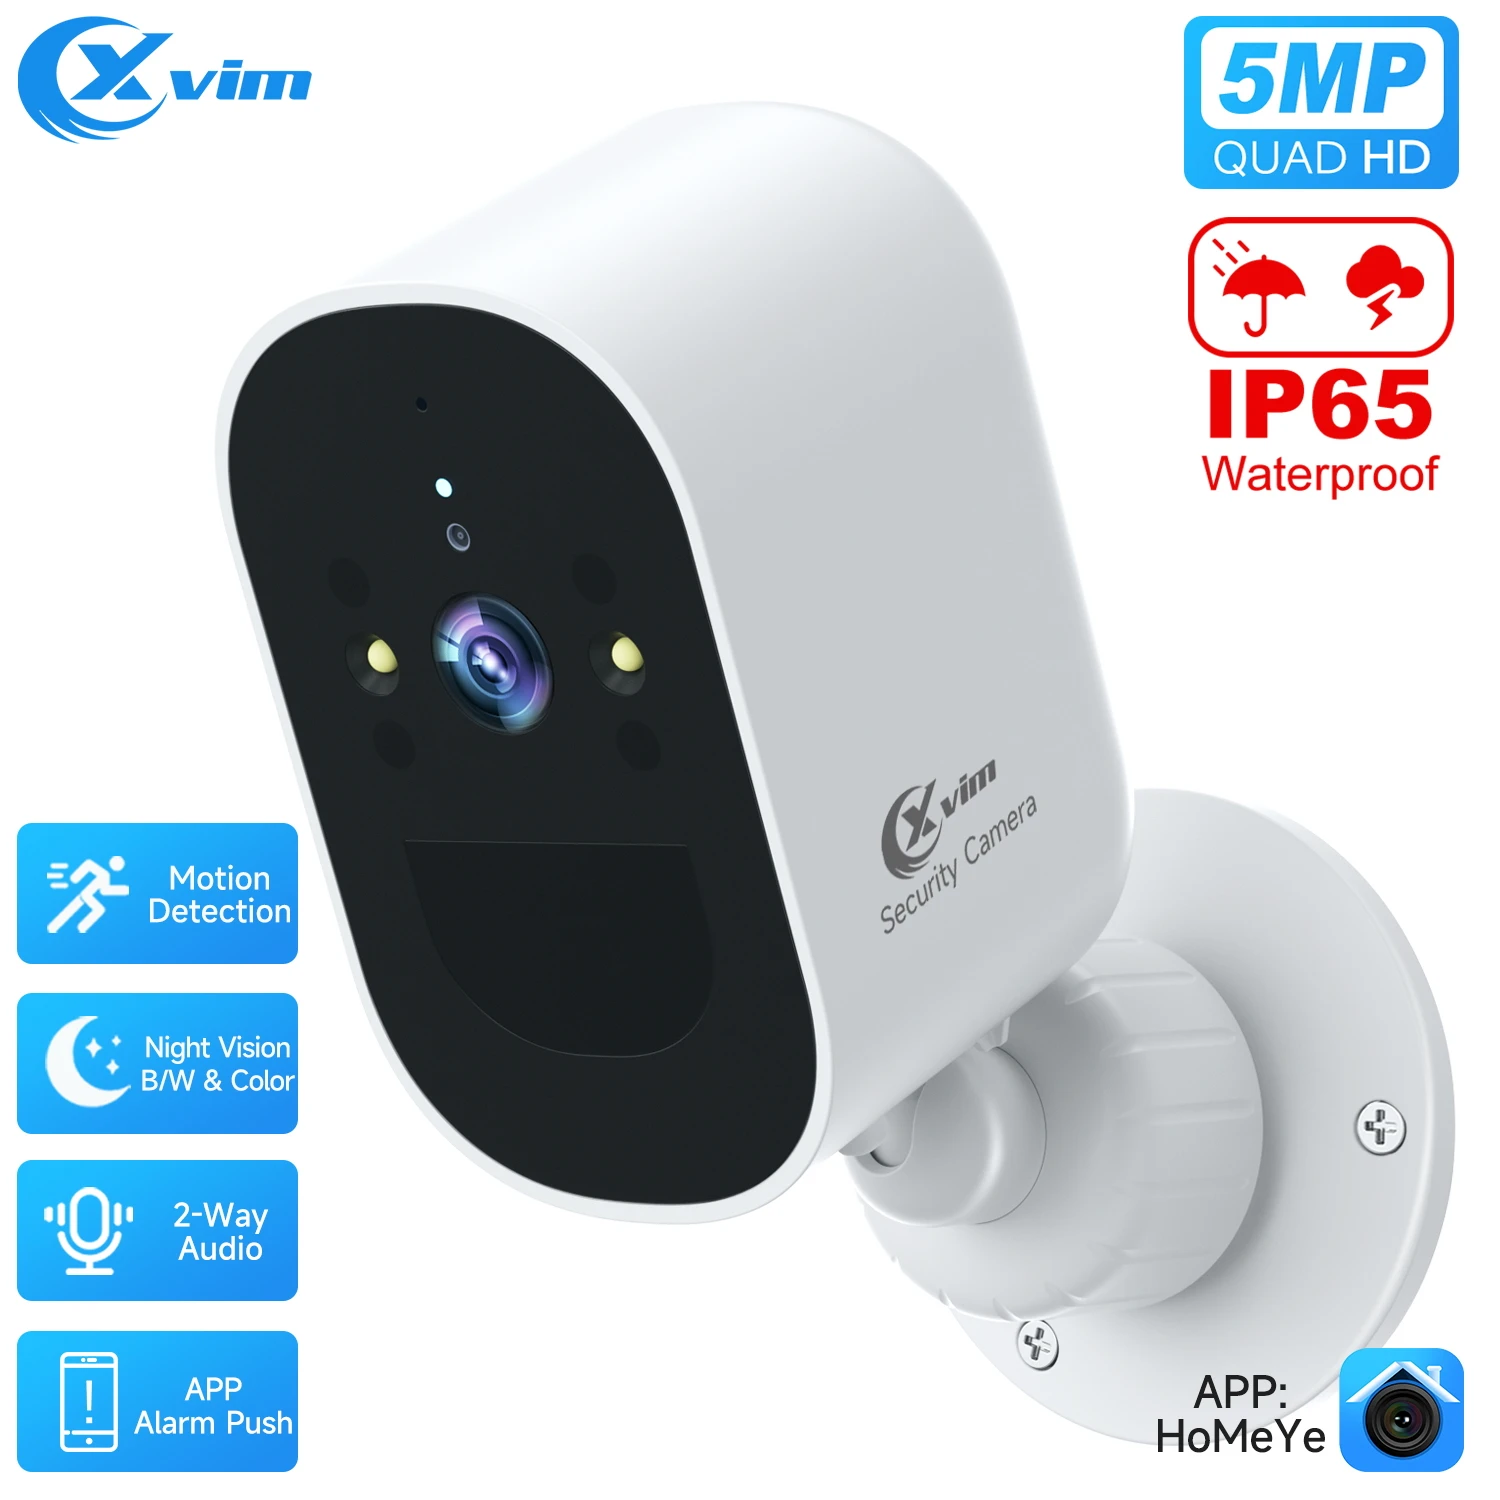 XVIM 5MP Surveillance Camera IR Night Vision Motion Detection Outdoor Security Home HD Security Protection Survalance Camera